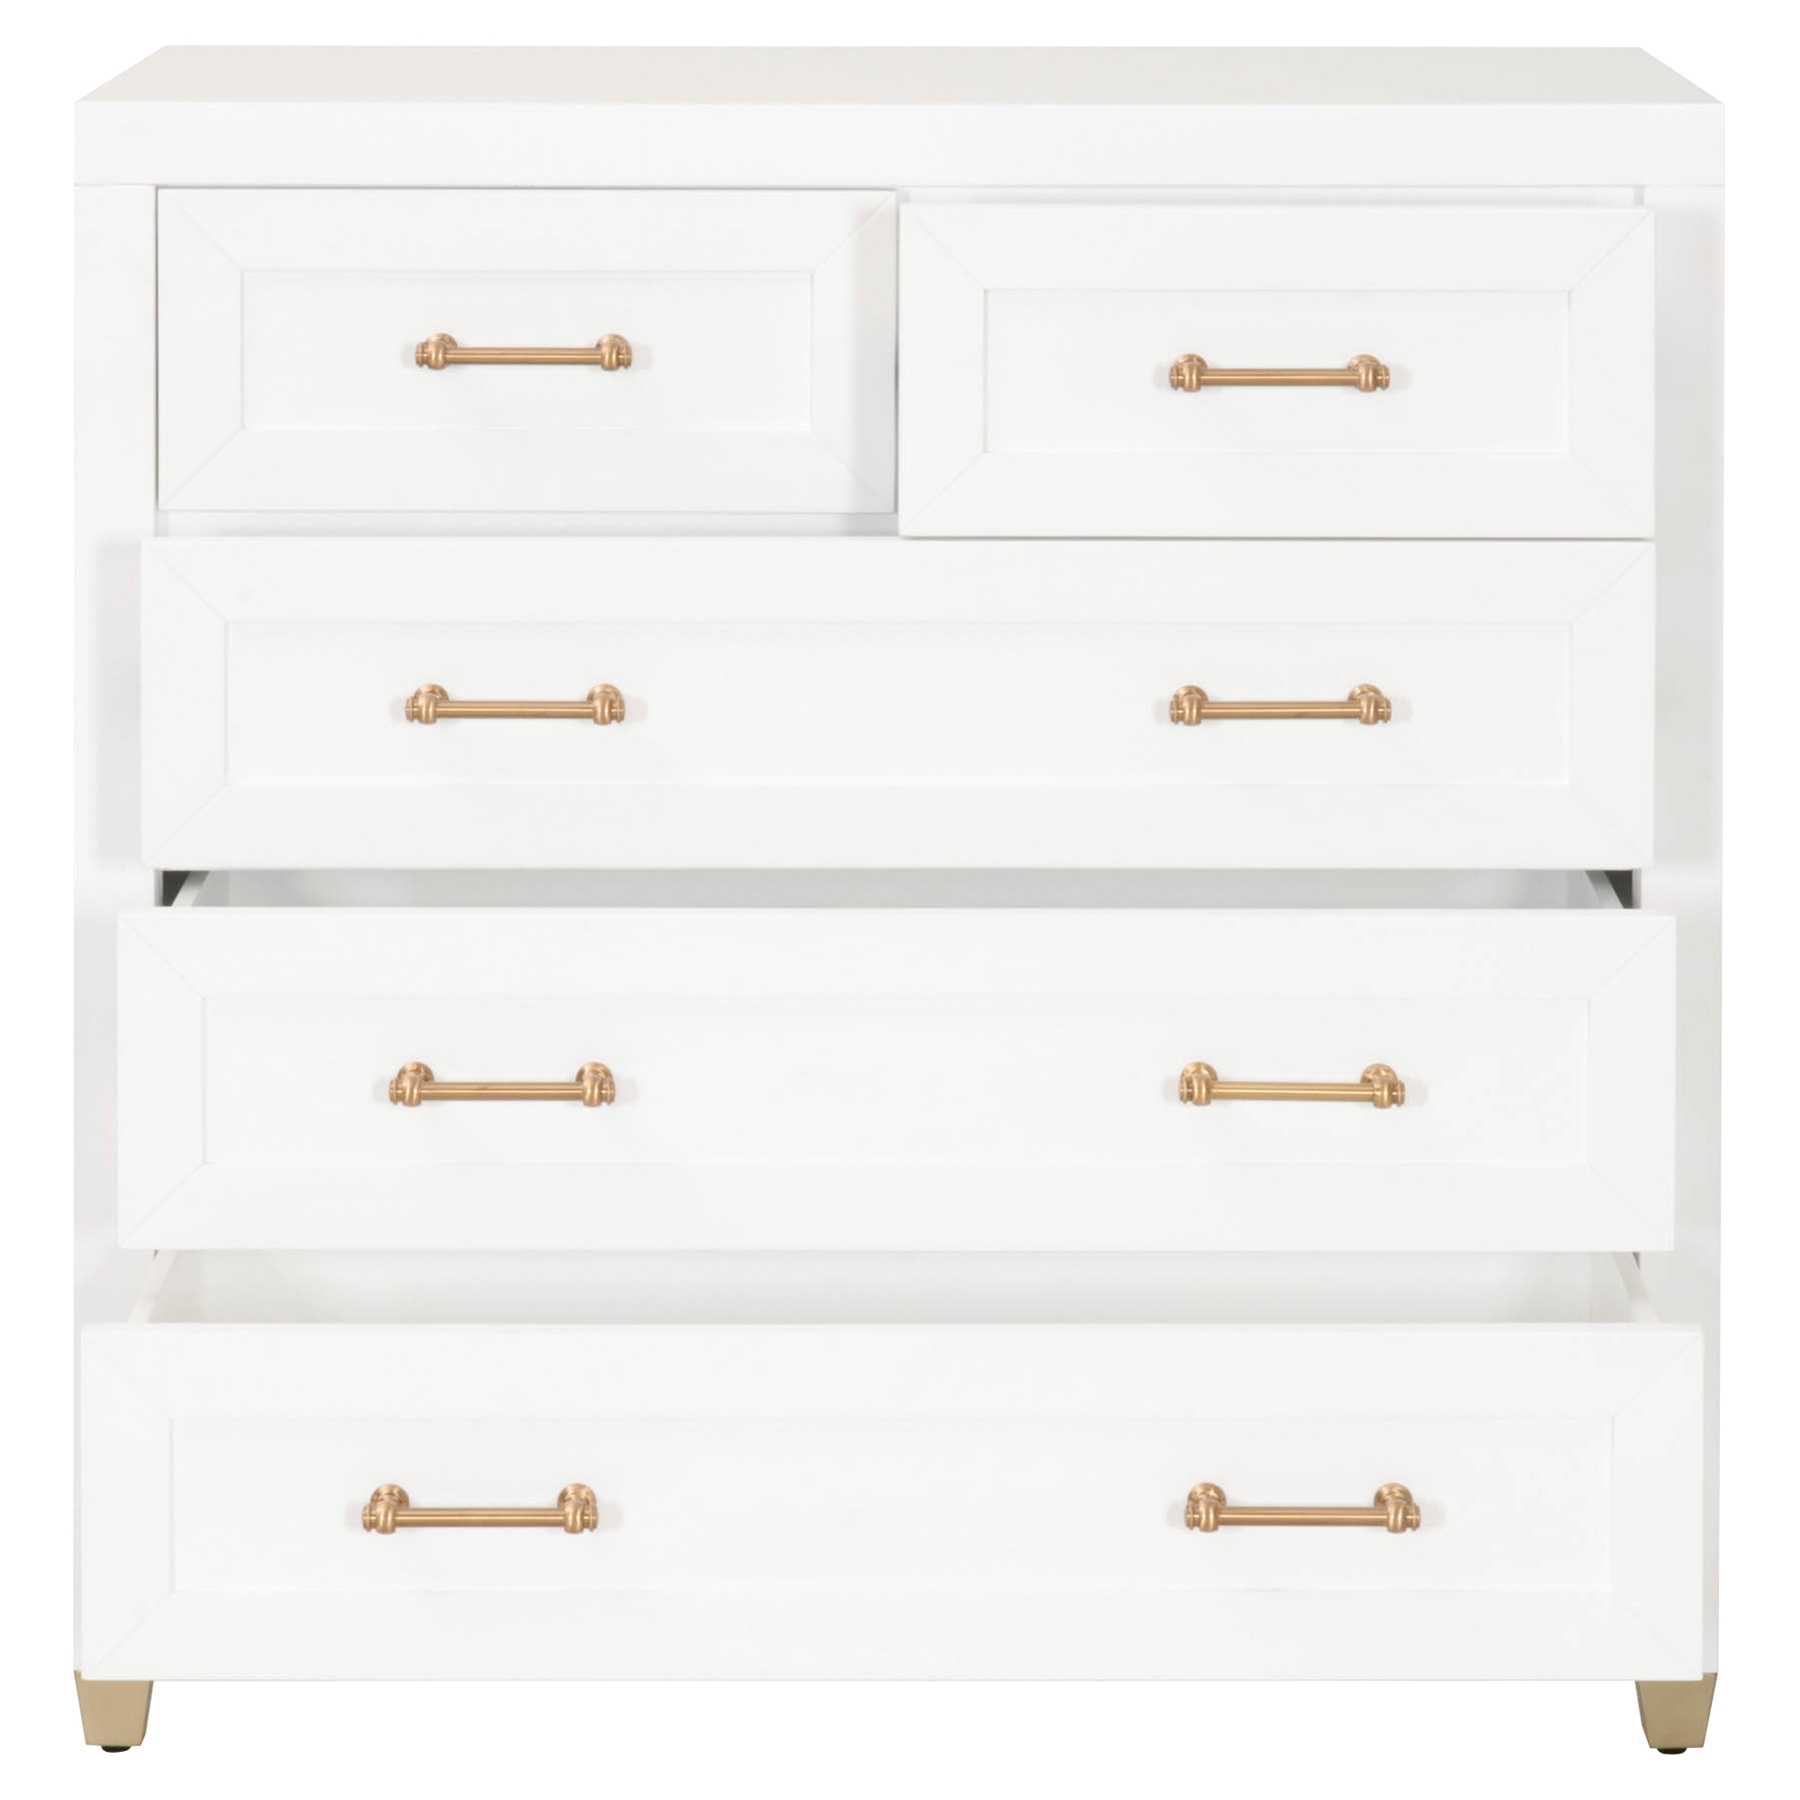 Stacy Modern Classic 5-Drawer Brass Accent White Dresser - Image 1